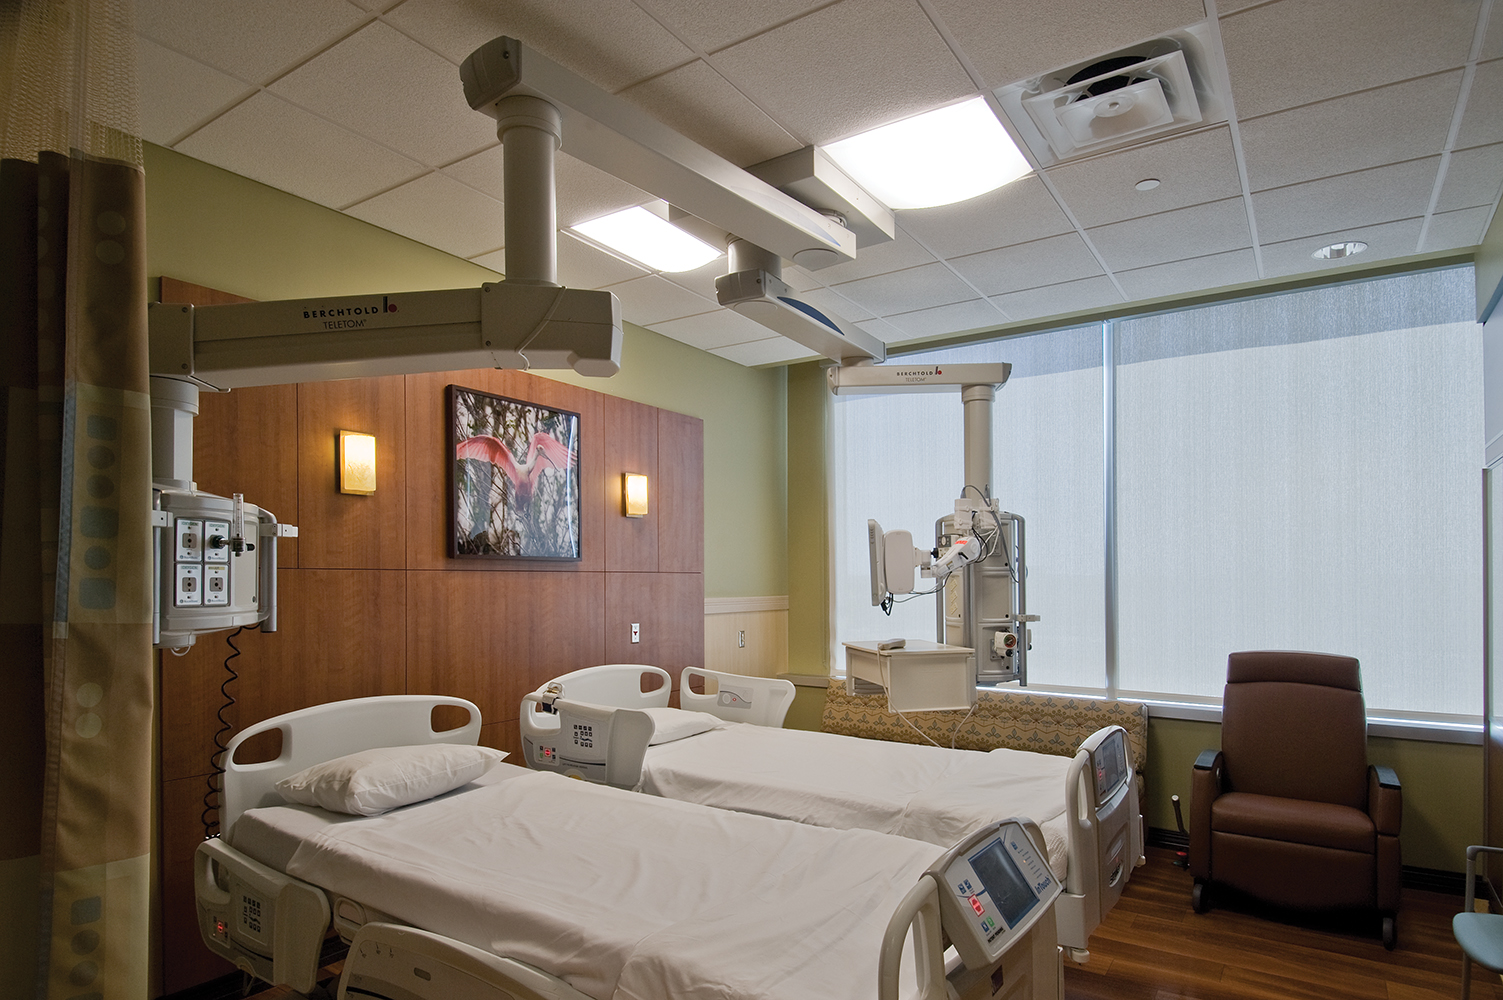 Unity medical lighting over two patient beds in a wood-paneled patient area.